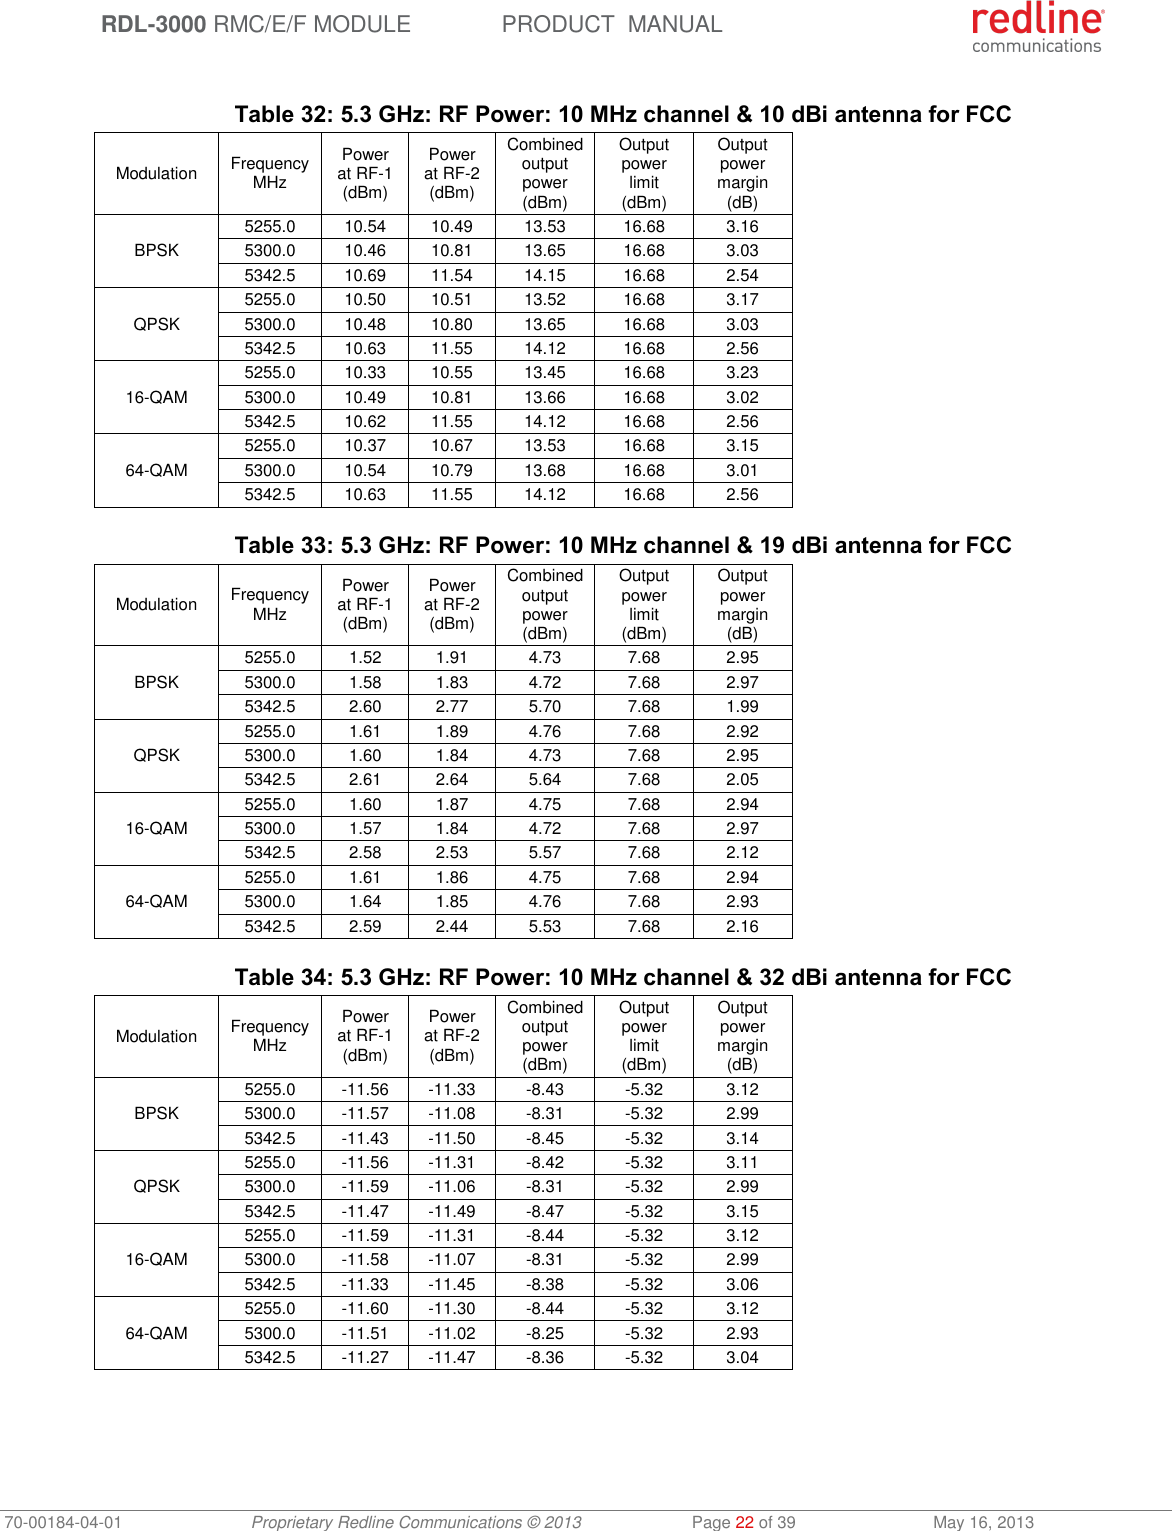  RDL-3000 RMC/E/F MODULE PRODUCT  MANUAL 70-00184-04-01 Proprietary Redline Communications © 2013  Page 22 of 39  May 16, 2013  Table 32: 5.3 GHz: RF Power: 10 MHz channel &amp; 10 dBi antenna for FCC Modulation FrequencyMHz Power at RF-1 (dBm) Power at RF-2 (dBm) Combined output power (dBm) Output power limit (dBm) Output power margin (dB) BPSK 5255.0 10.54 10.49 13.53 16.68 3.16 5300.0 10.46 10.81 13.65 16.68 3.03 5342.5 10.69 11.54 14.15 16.68 2.54 QPSK 5255.0 10.50 10.51 13.52 16.68 3.17 5300.0 10.48 10.80 13.65 16.68 3.03 5342.5 10.63 11.55 14.12 16.68 2.56 16-QAM 5255.0 10.33 10.55 13.45 16.68 3.23 5300.0 10.49 10.81 13.66 16.68 3.02 5342.5 10.62 11.55 14.12 16.68 2.56 64-QAM 5255.0 10.37 10.67 13.53 16.68 3.15 5300.0 10.54 10.79 13.68 16.68 3.01 5342.5 10.63 11.55 14.12 16.68 2.56  Table 33: 5.3 GHz: RF Power: 10 MHz channel &amp; 19 dBi antenna for FCC Modulation FrequencyMHz Power at RF-1 (dBm) Power at RF-2 (dBm) Combined output power (dBm) Output power limit (dBm) Output power margin (dB) BPSK 5255.0 1.52 1.91 4.73 7.68 2.95 5300.0 1.58 1.83 4.72 7.68 2.97 5342.5 2.60 2.77 5.70 7.68 1.99 QPSK 5255.0 1.61 1.89 4.76 7.68 2.92 5300.0 1.60 1.84 4.73 7.68 2.95 5342.5 2.61 2.64 5.64 7.68 2.05 16-QAM 5255.0 1.60 1.87 4.75 7.68 2.94 5300.0 1.57 1.84 4.72 7.68 2.97 5342.5 2.58 2.53 5.57 7.68 2.12 64-QAM 5255.0 1.61 1.86 4.75 7.68 2.94 5300.0 1.64 1.85 4.76 7.68 2.93 5342.5 2.59 2.44 5.53 7.68 2.16  Table 34: 5.3 GHz: RF Power: 10 MHz channel &amp; 32 dBi antenna for FCC Modulation FrequencyMHz Power at RF-1 (dBm) Power at RF-2 (dBm) Combined output power (dBm) Output power limit (dBm) Output power margin (dB) BPSK 5255.0 -11.56 -11.33 -8.43 -5.32 3.12 5300.0 -11.57 -11.08 -8.31 -5.32 2.99 5342.5 -11.43 -11.50 -8.45 -5.32 3.14 QPSK 5255.0 -11.56 -11.31 -8.42 -5.32 3.11 5300.0 -11.59 -11.06 -8.31 -5.32 2.99 5342.5 -11.47 -11.49 -8.47 -5.32 3.15 16-QAM 5255.0 -11.59 -11.31 -8.44 -5.32 3.12 5300.0 -11.58 -11.07 -8.31 -5.32 2.99 5342.5 -11.33 -11.45 -8.38 -5.32 3.06 64-QAM 5255.0 -11.60 -11.30 -8.44 -5.32 3.12 5300.0 -11.51 -11.02 -8.25 -5.32 2.93 5342.5 -11.27 -11.47 -8.36 -5.32 3.04  